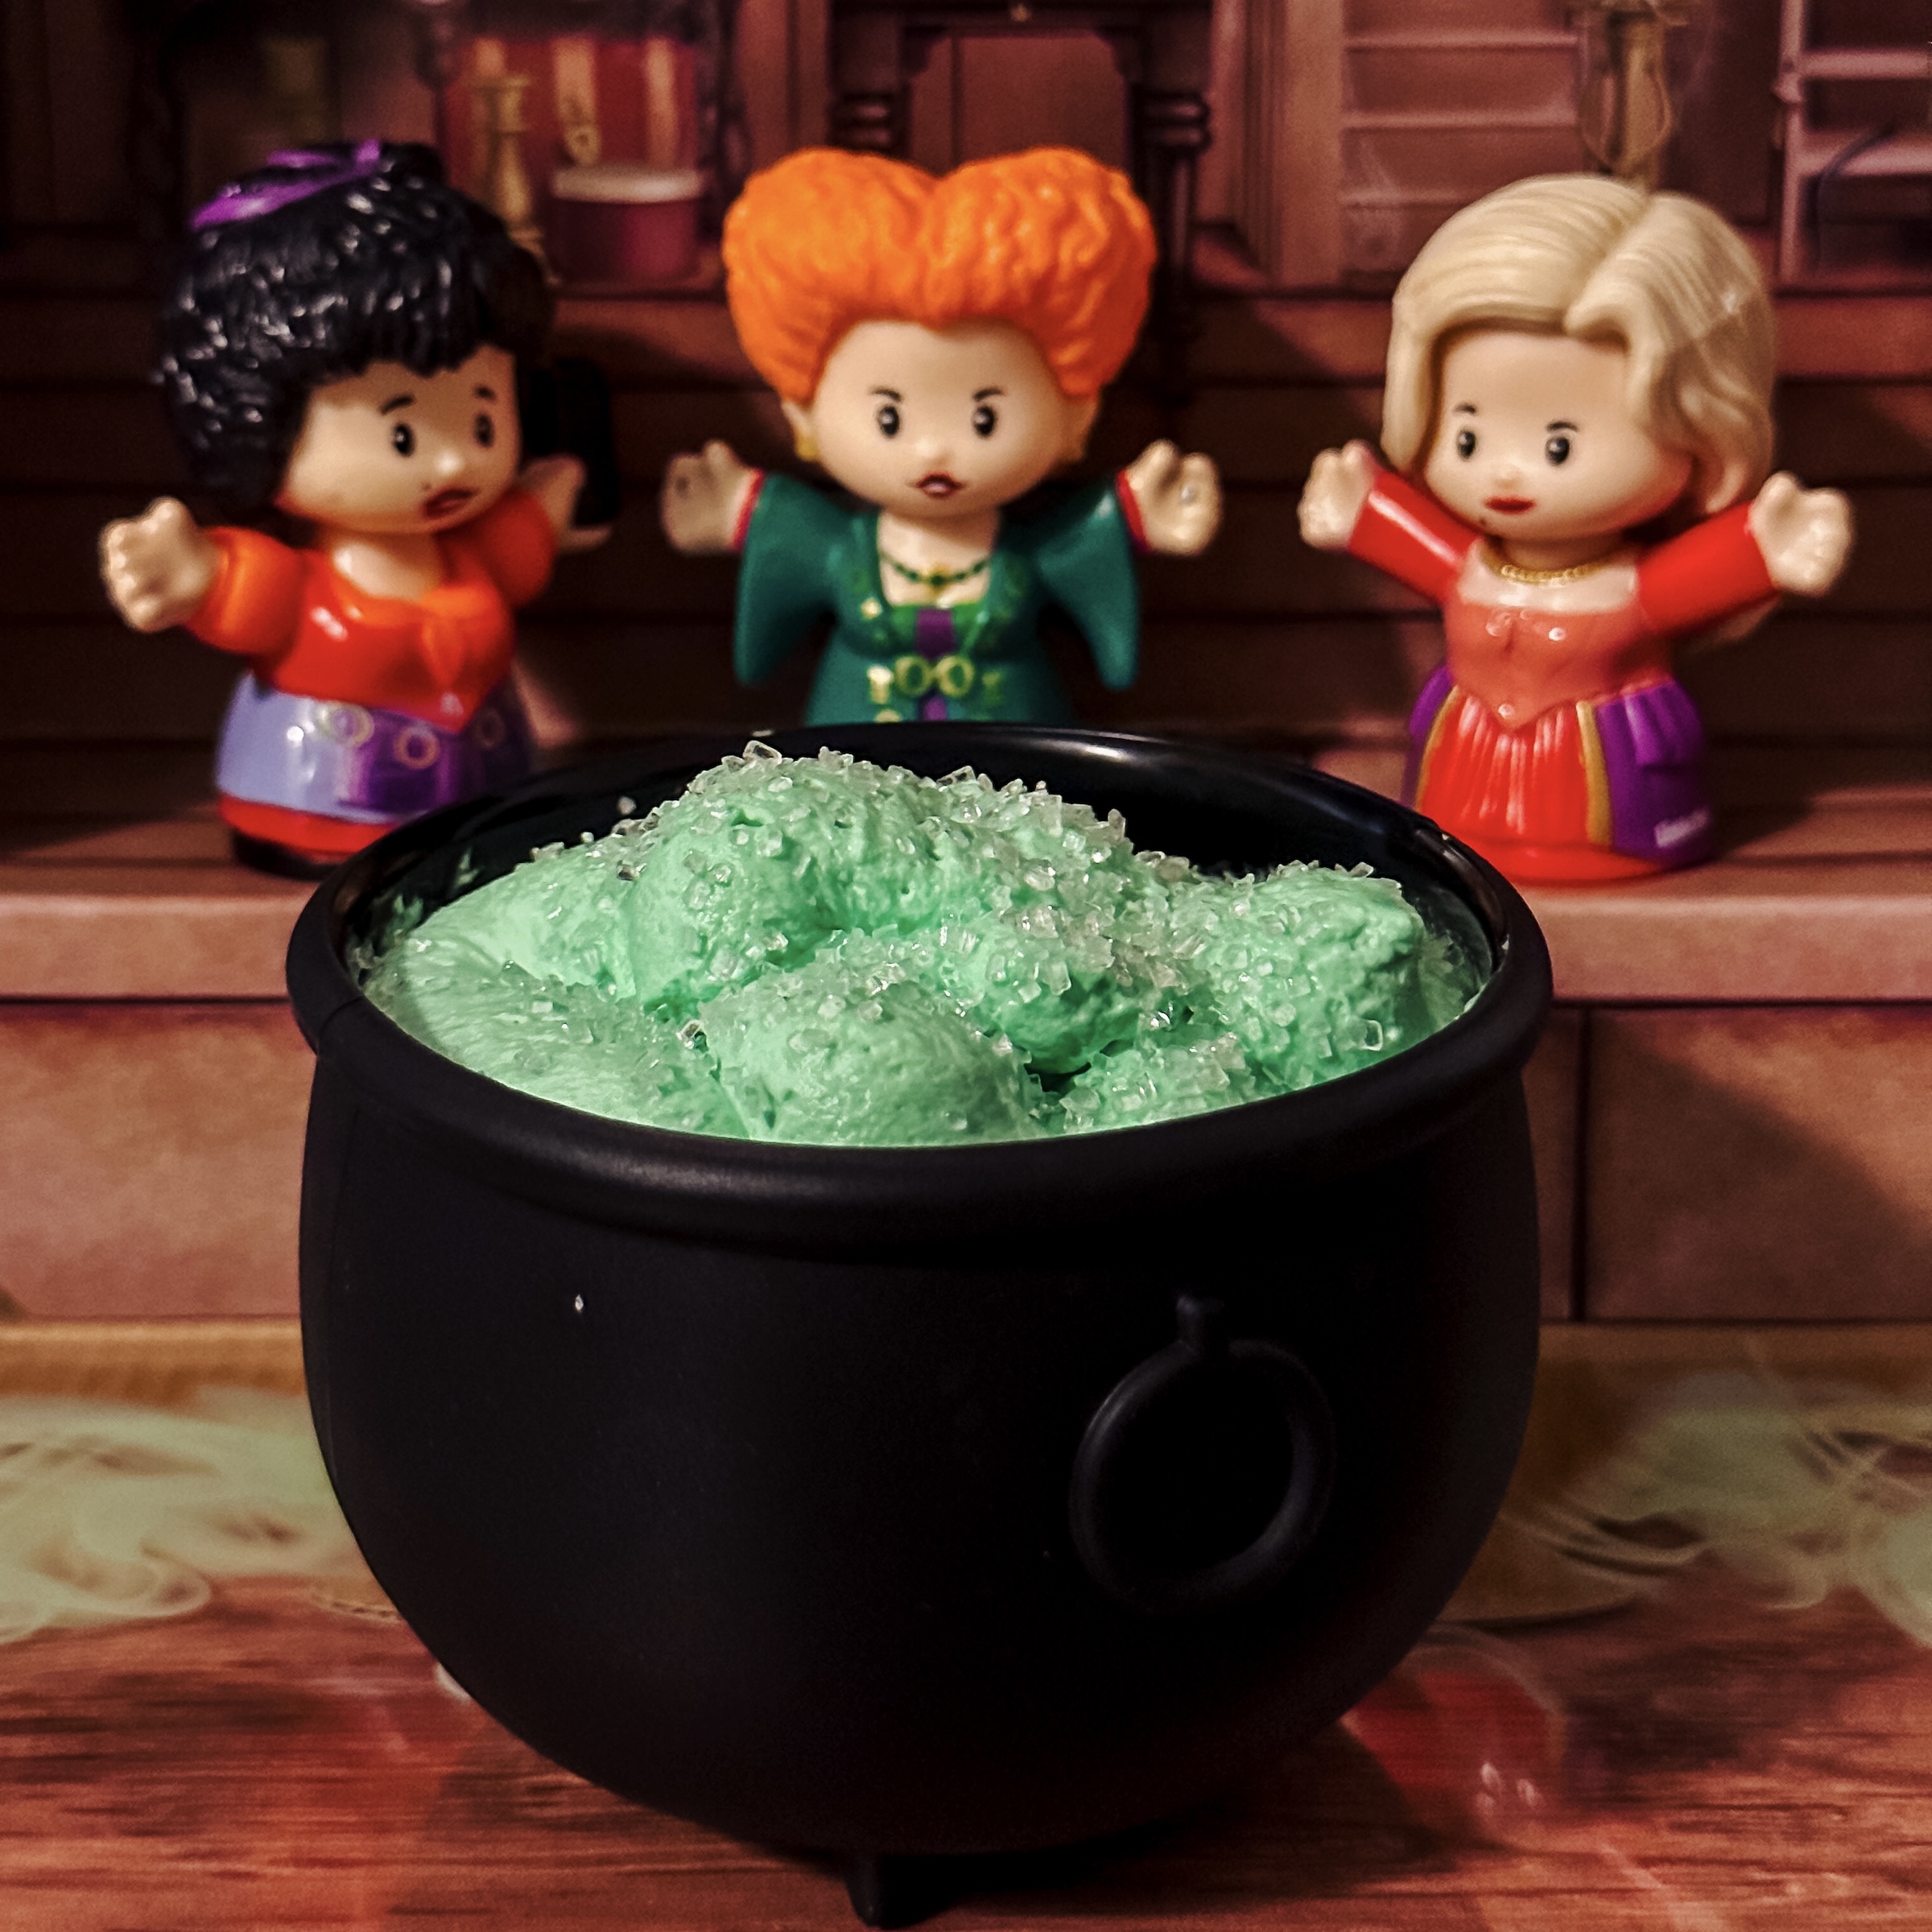 Hocus Pocus Mousse Cauldrons (chocolate mousse in a cauldron with green whipped cream)